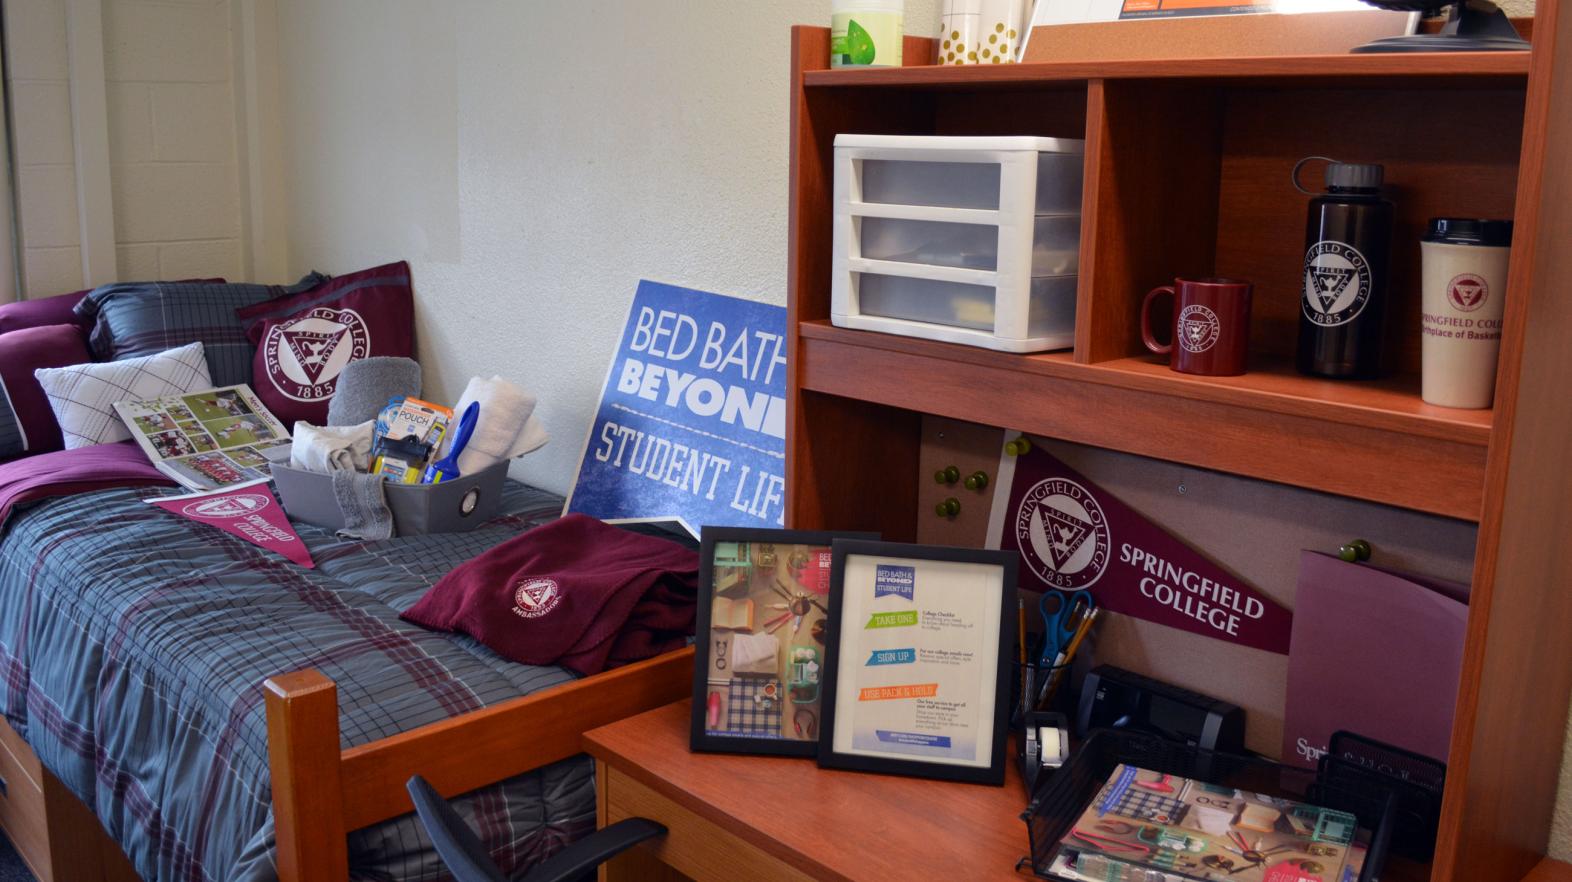 A Massasoit Hall residence room with bed and desk adorned with Springfield College gear.